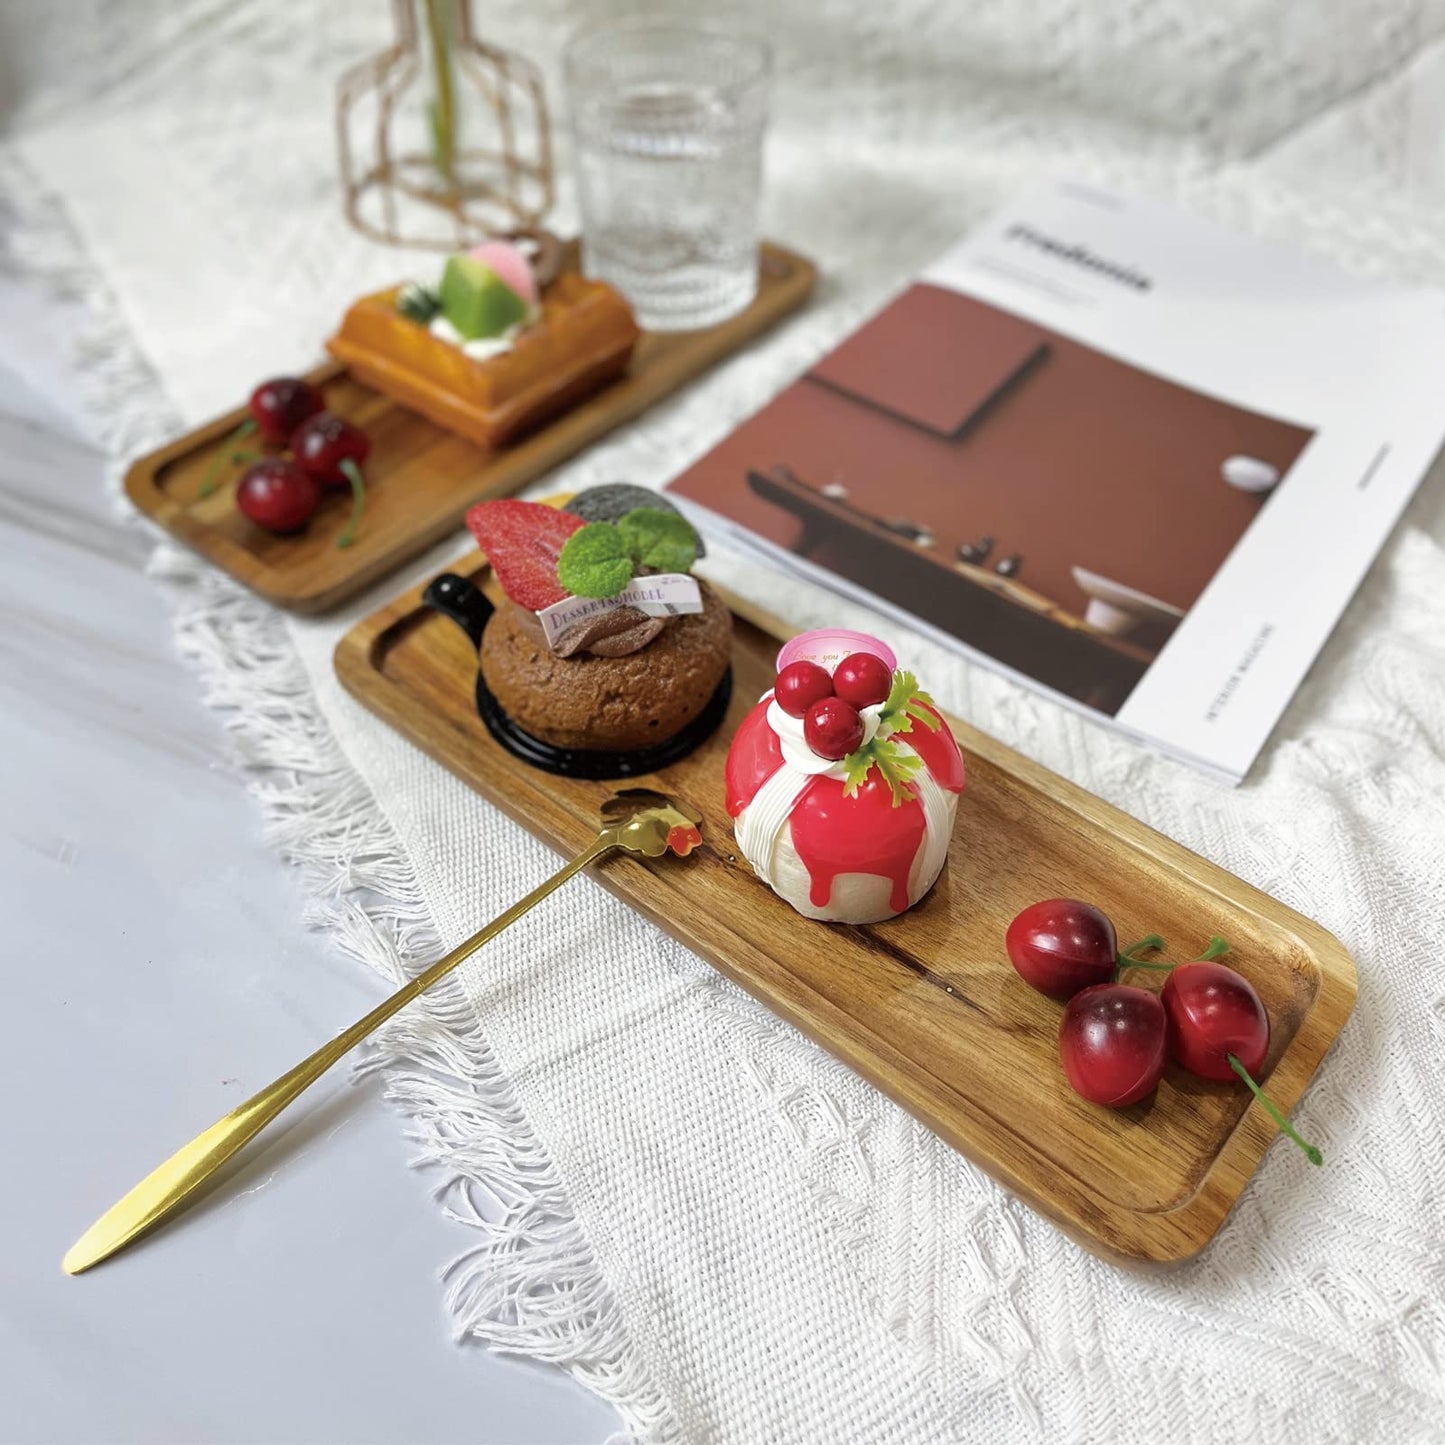 Wood Serving Tray, Wooden Trays,Small Wood Tray Wood Platter for Serving Food Dessert Appetizer Cheese Boards Fruit Cookie Vanity Home Decor Bathroom